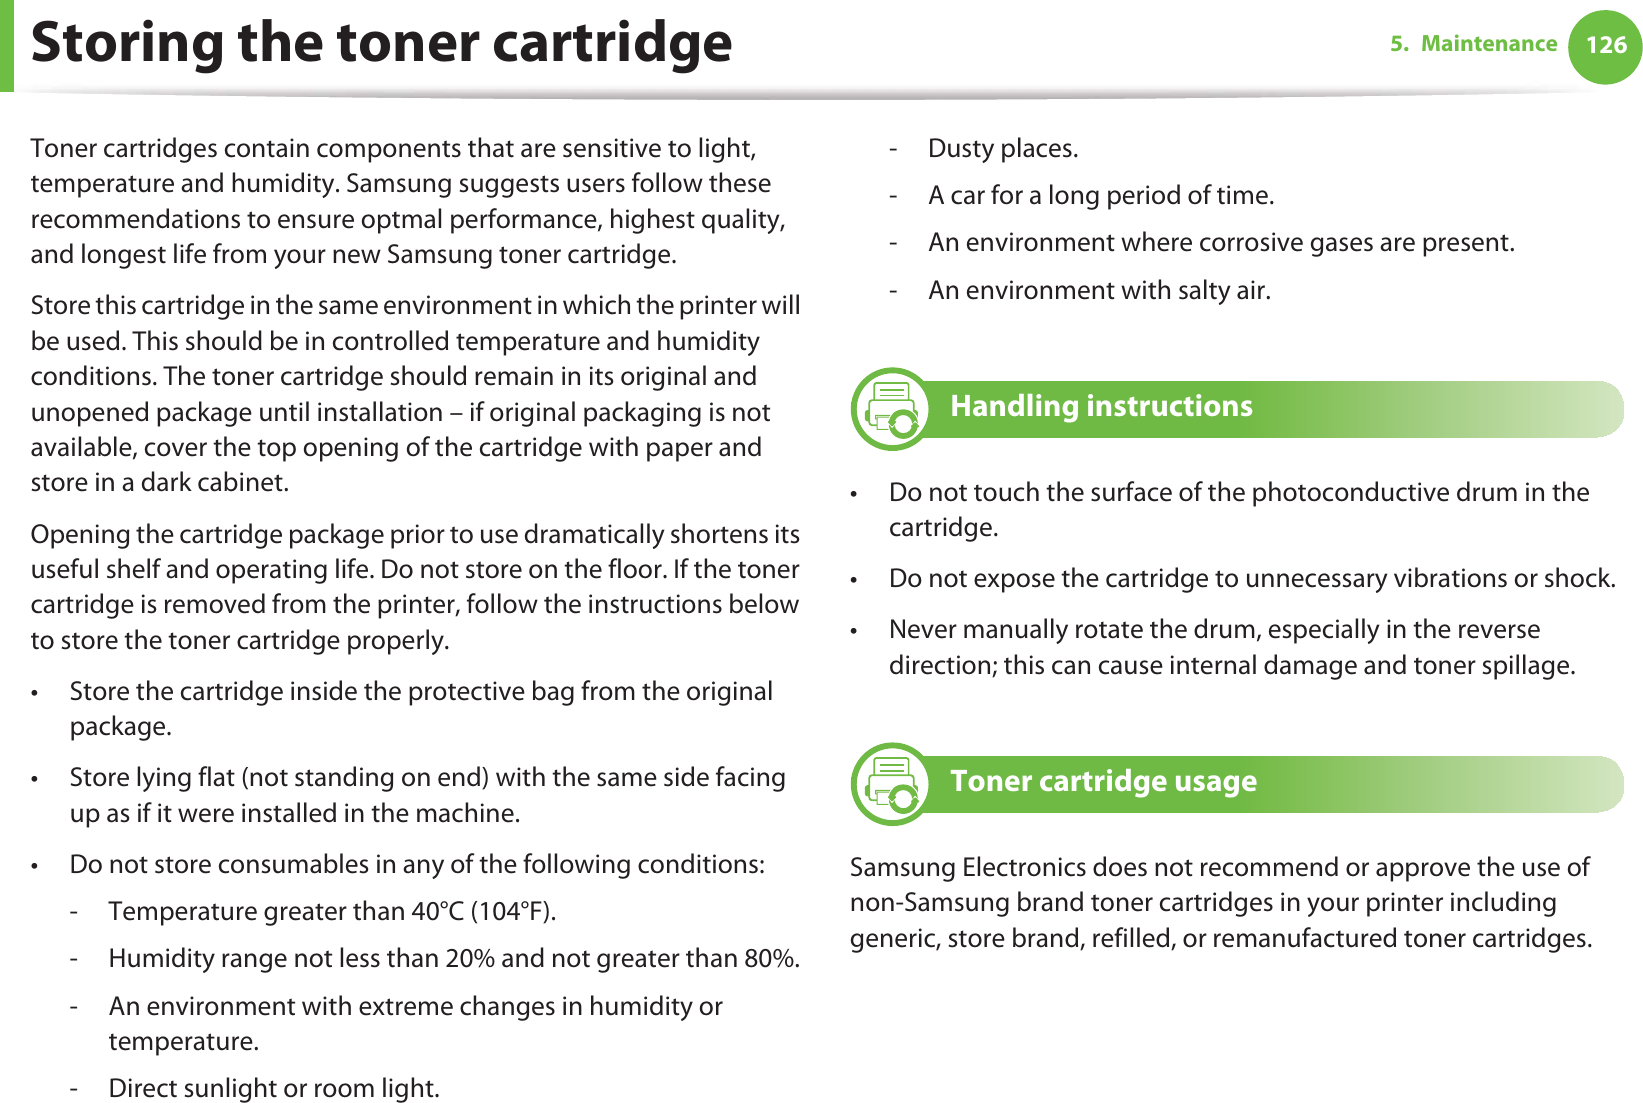 1265. MaintenanceStoring the toner cartridgeToner cartridges contain components that are sensitive to light, temperature and humidity. Samsung suggests users follow these recommendations to ensure optmal performance, highest quality, and longest life from your new Samsung toner cartridge.Store this cartridge in the same environment in which the printer will be used. This should be in controlled temperature and humidity conditions. The toner cartridge should remain in its original and unopened package until installation – if original packaging is not available, cover the top opening of the cartridge with paper and store in a dark cabinet.Opening the cartridge package prior to use dramatically shortens its useful shelf and operating life. Do not store on the floor. If the toner cartridge is removed from the printer, follow the instructions below to store the toner cartridge properly.• Store the cartridge inside the protective bag from the original package. • Store lying flat (not standing on end) with the same side facing up as if it were installed in the machine.• Do not store consumables in any of the following conditions:- Temperature greater than 40°C (104°F).- Humidity range not less than 20% and not greater than 80%.- An environment with extreme changes in humidity or temperature.- Direct sunlight or room light.-Dusty places.- A car for a long period of time.- An environment where corrosive gases are present.- An environment with salty air.1 Handling instructions• Do not touch the surface of the photoconductive drum in the cartridge.• Do not expose the cartridge to unnecessary vibrations or shock.• Never manually rotate the drum, especially in the reverse direction; this can cause internal damage and toner spillage.2 Toner cartridge usageSamsung Electronics does not recommend or approve the use of non-Samsung brand toner cartridges in your printer including generic, store brand, refilled, or remanufactured toner cartridges.